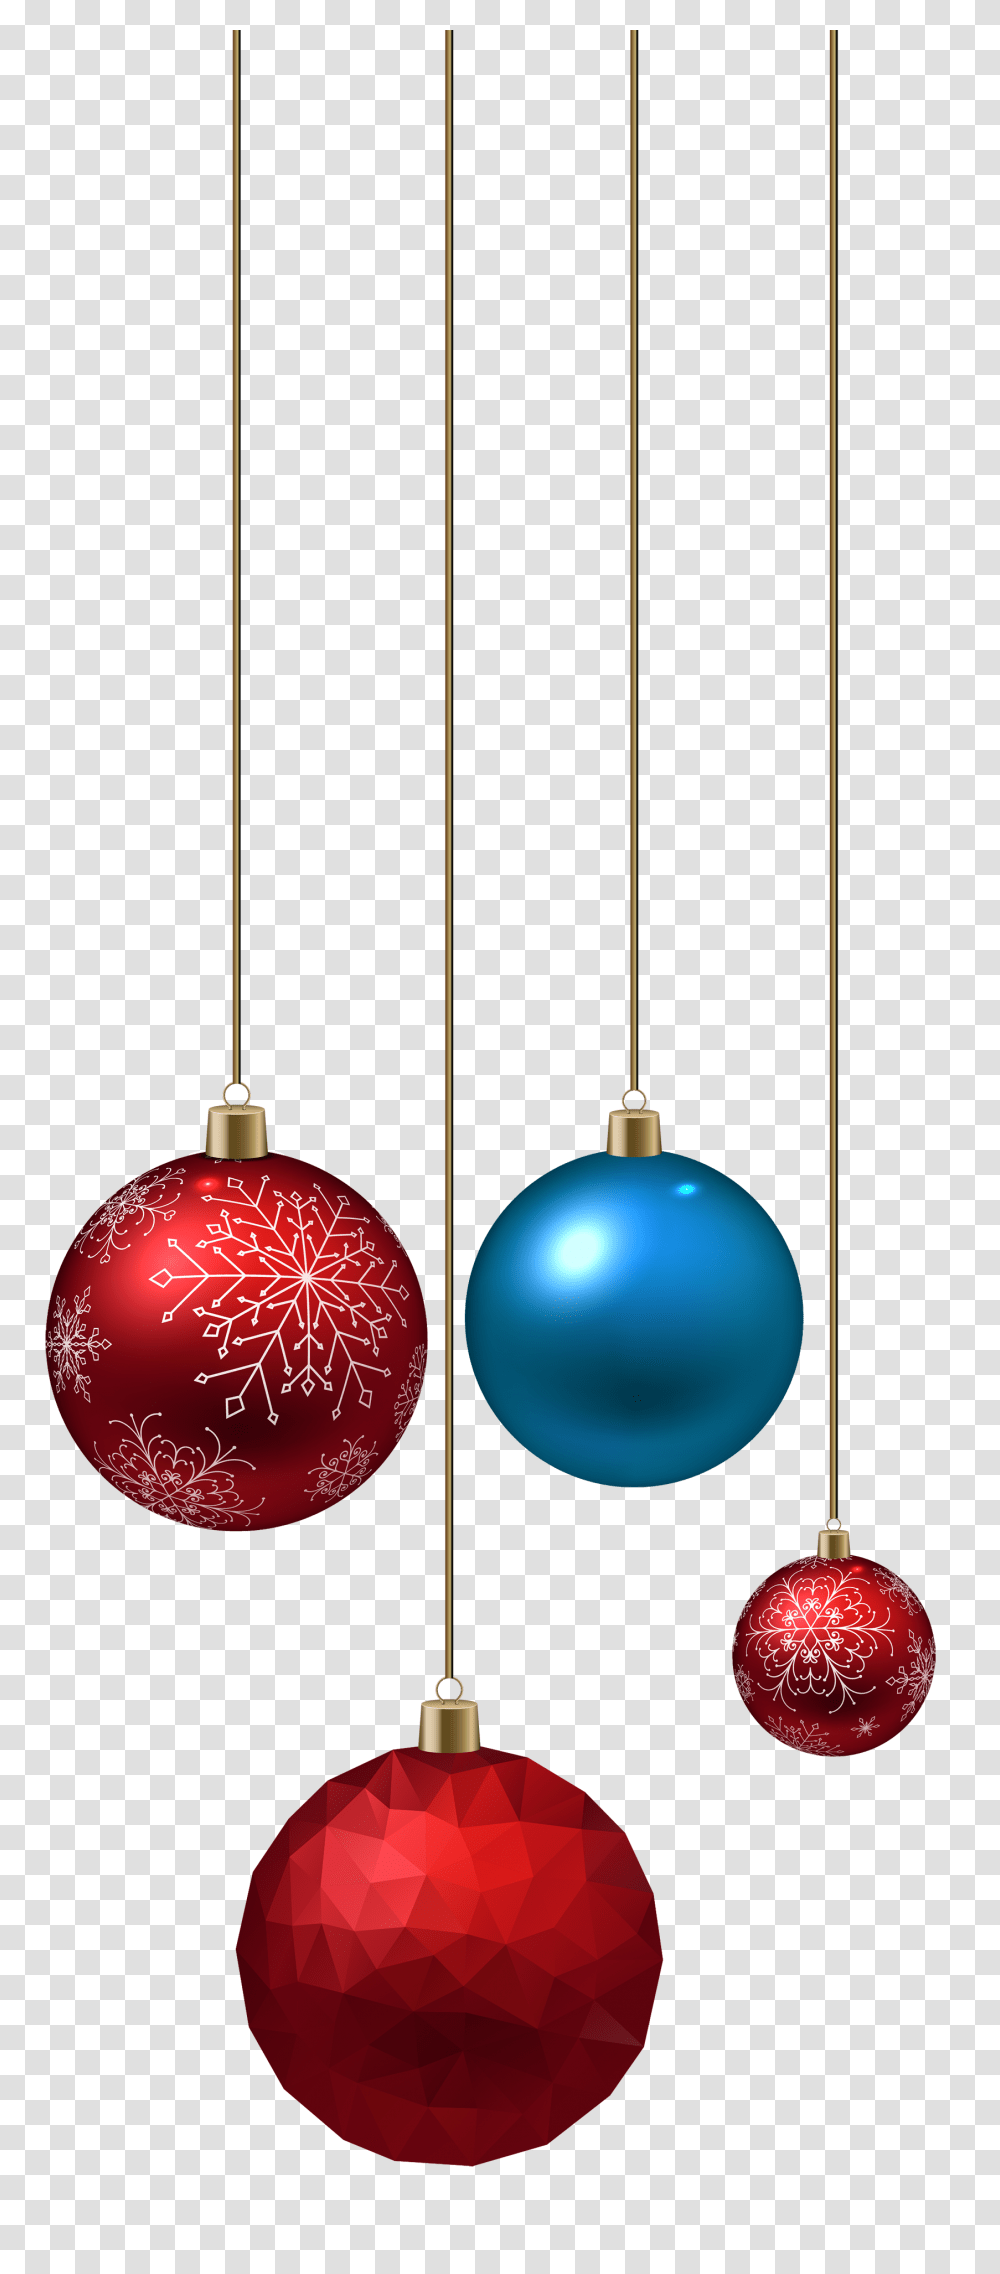 Blue And Red Christmas Ball Images Christmas Balls Background, Sphere, Lighting, Ornament, Home Decor Transparent Png